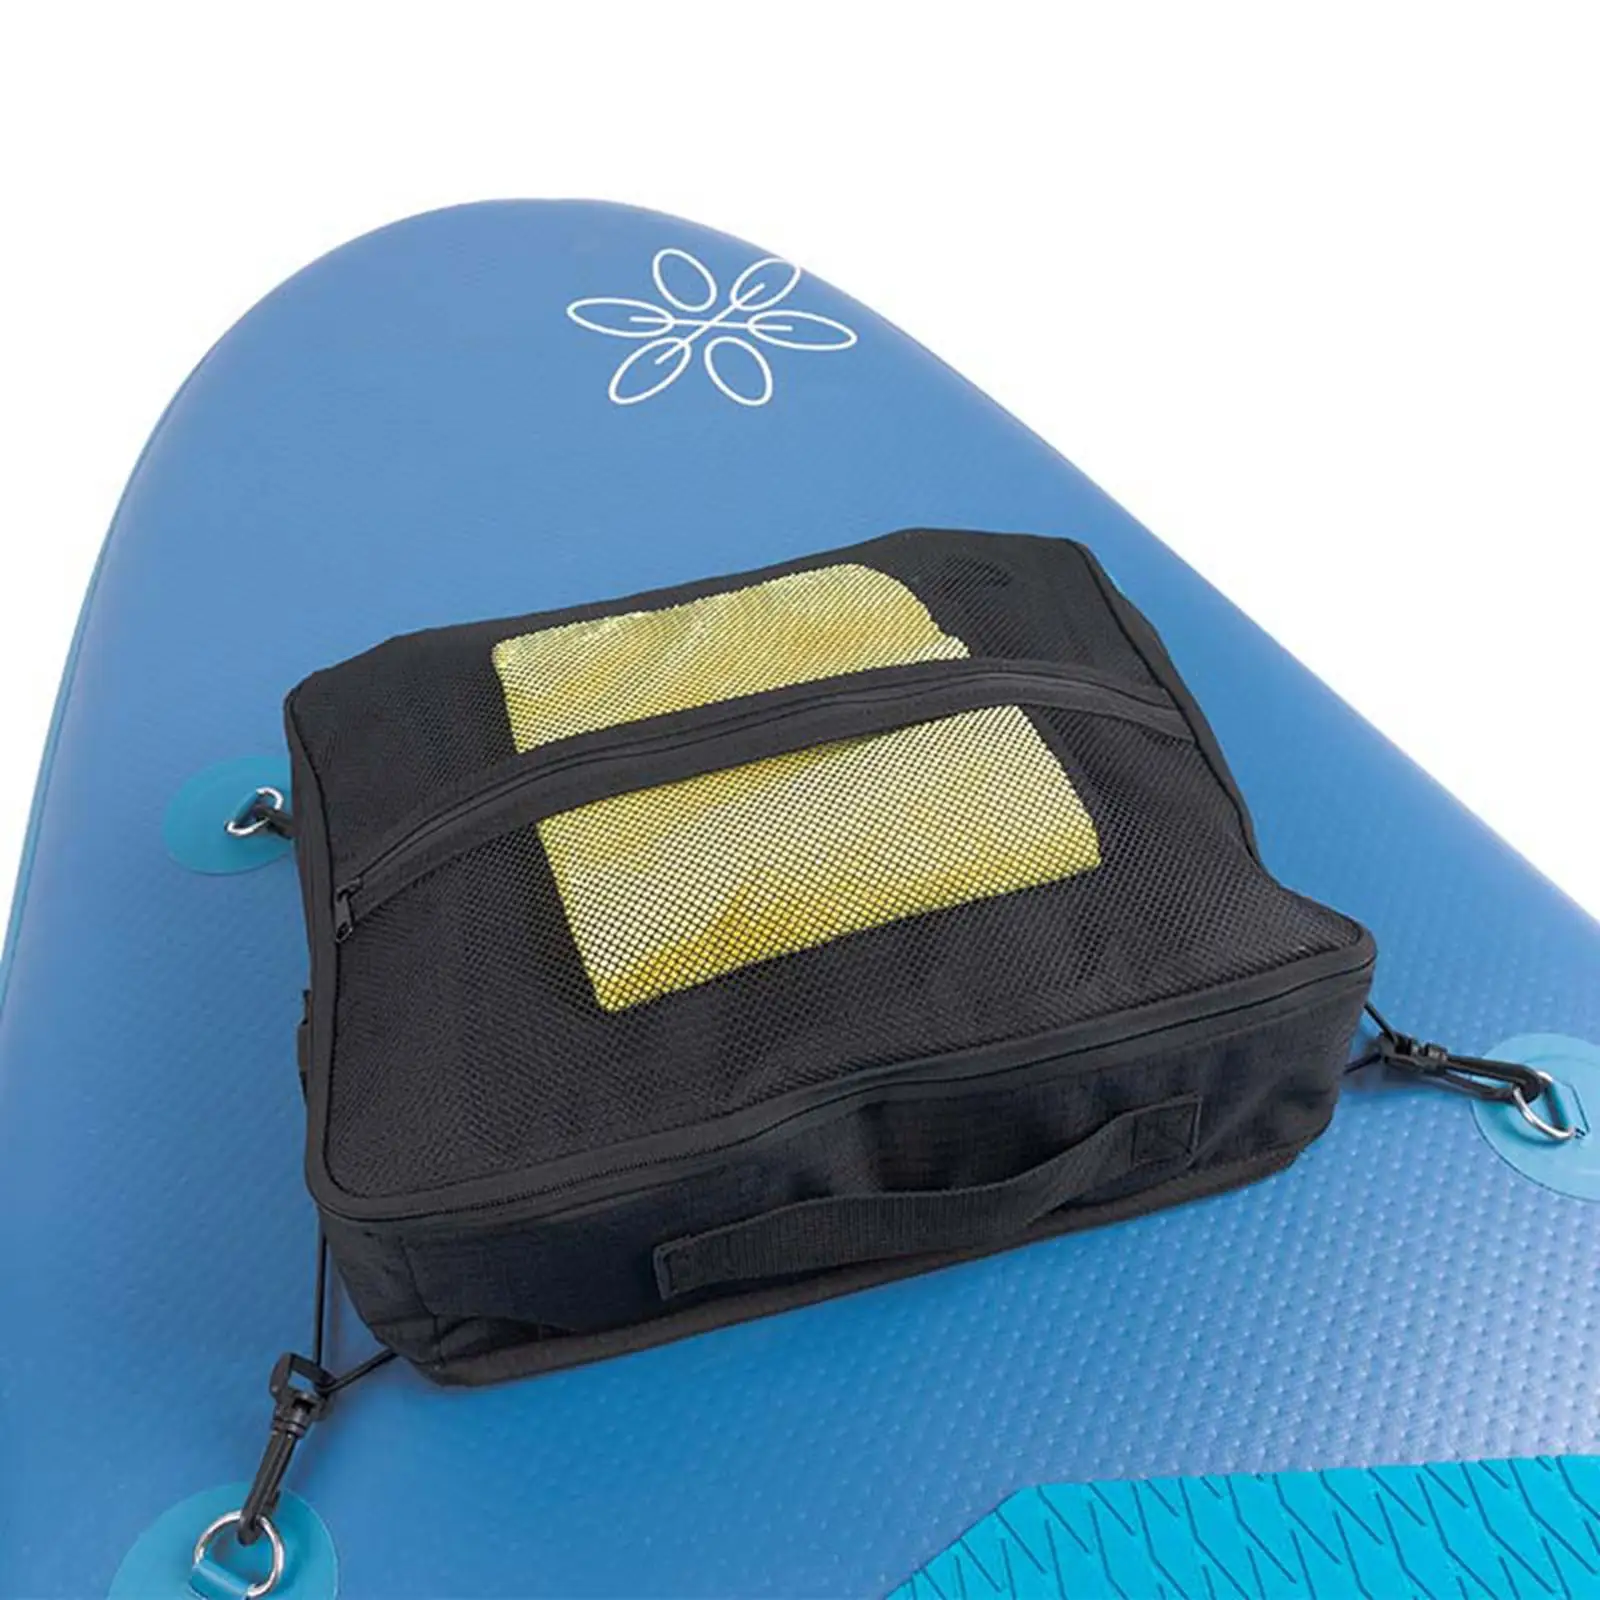 Paddle Board Cooler Deck Bag Mesh Storage Bag Insulated Large Capacity Portable Drink Handbag Tote for Outdoor Boating Surfing